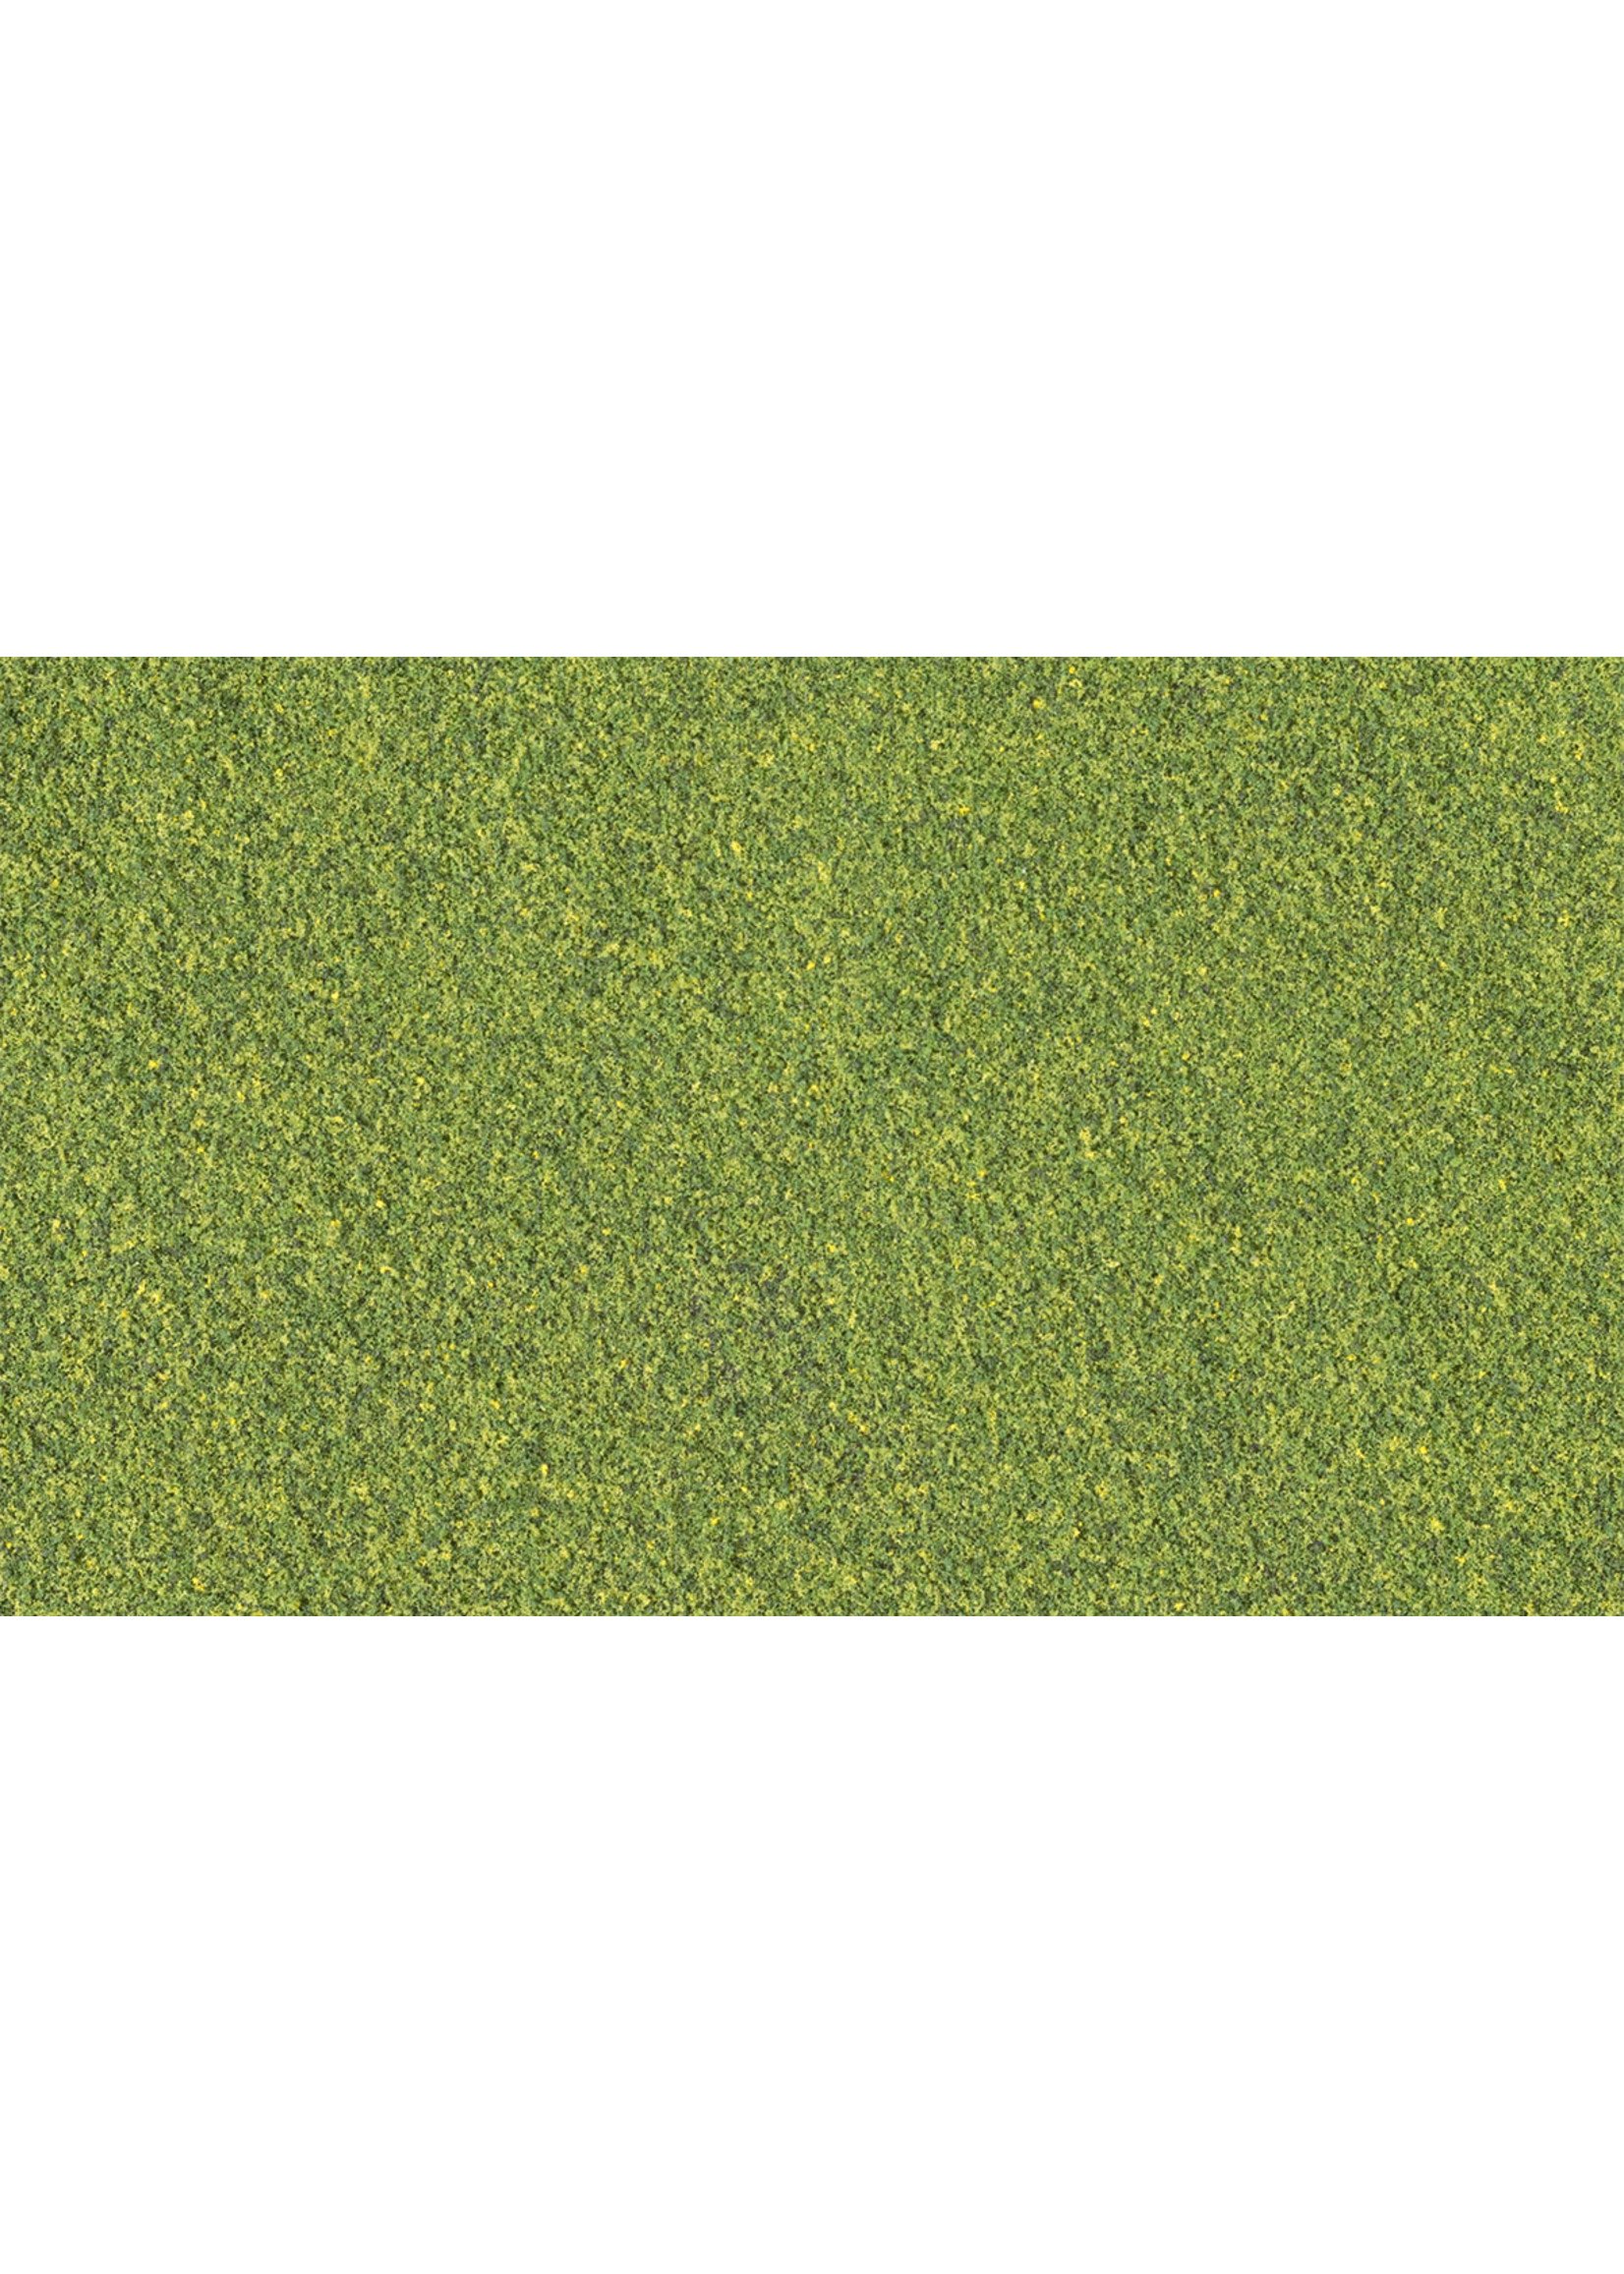 Woodland Scenics T49 - Blended Turf Bag, 54 cu. in. - Green